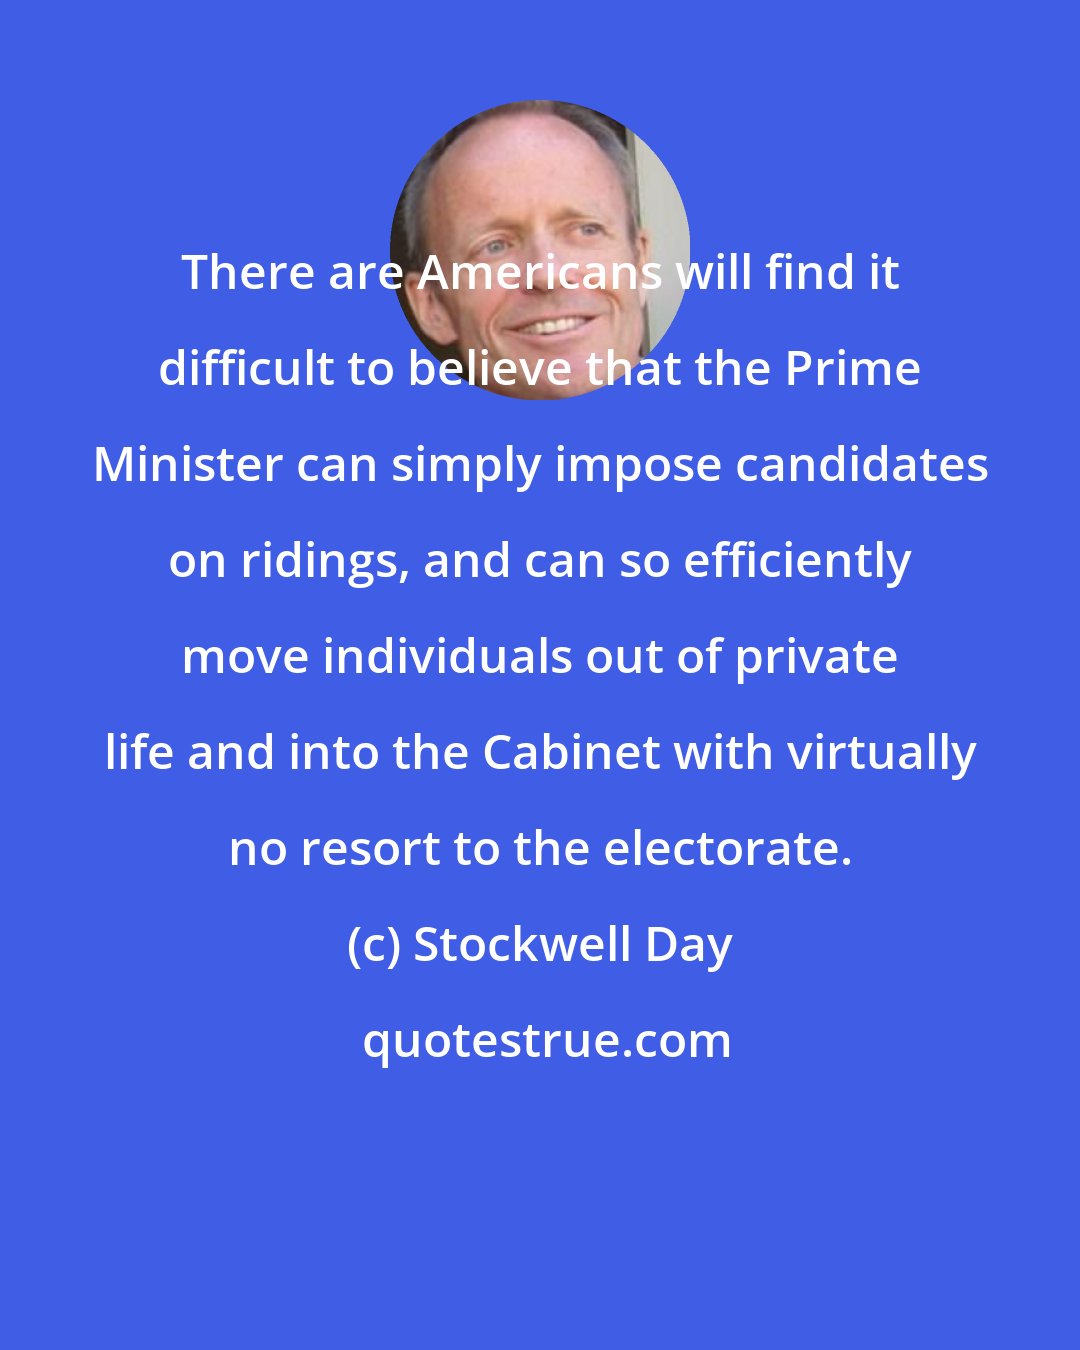 Stockwell Day: There are Americans will find it difficult to believe that the Prime Minister can simply impose candidates on ridings, and can so efficiently move individuals out of private life and into the Cabinet with virtually no resort to the electorate.